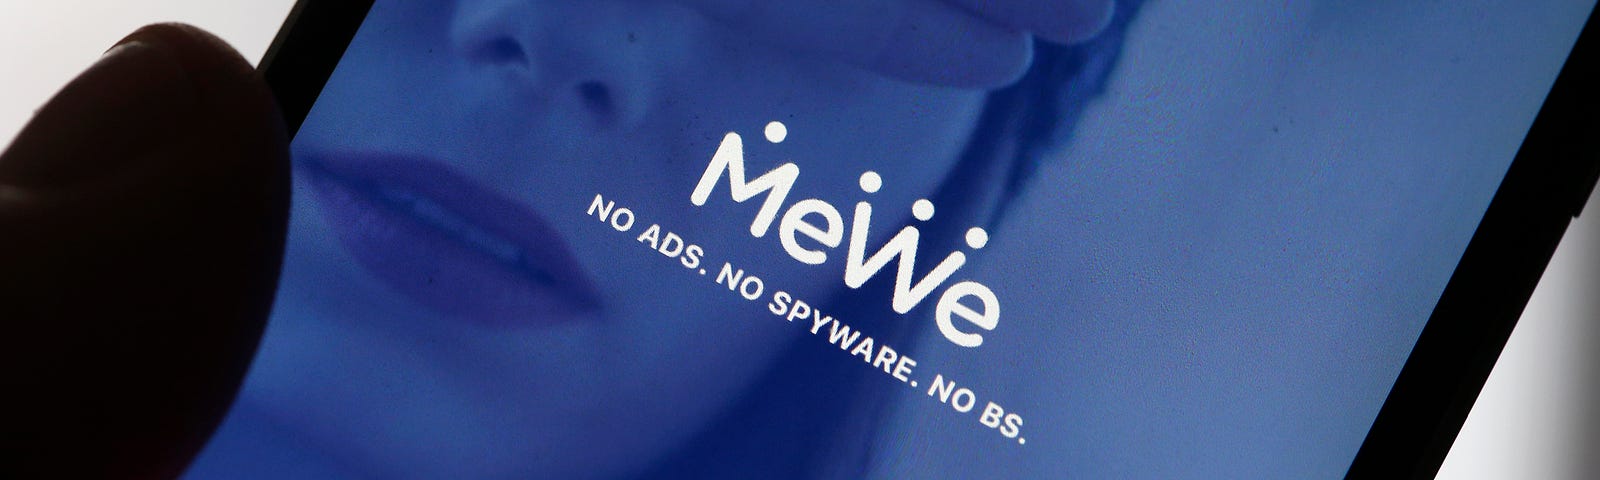 A photo illustration of the home page of the social media application MeWe displayed on the screen of an iPhone.